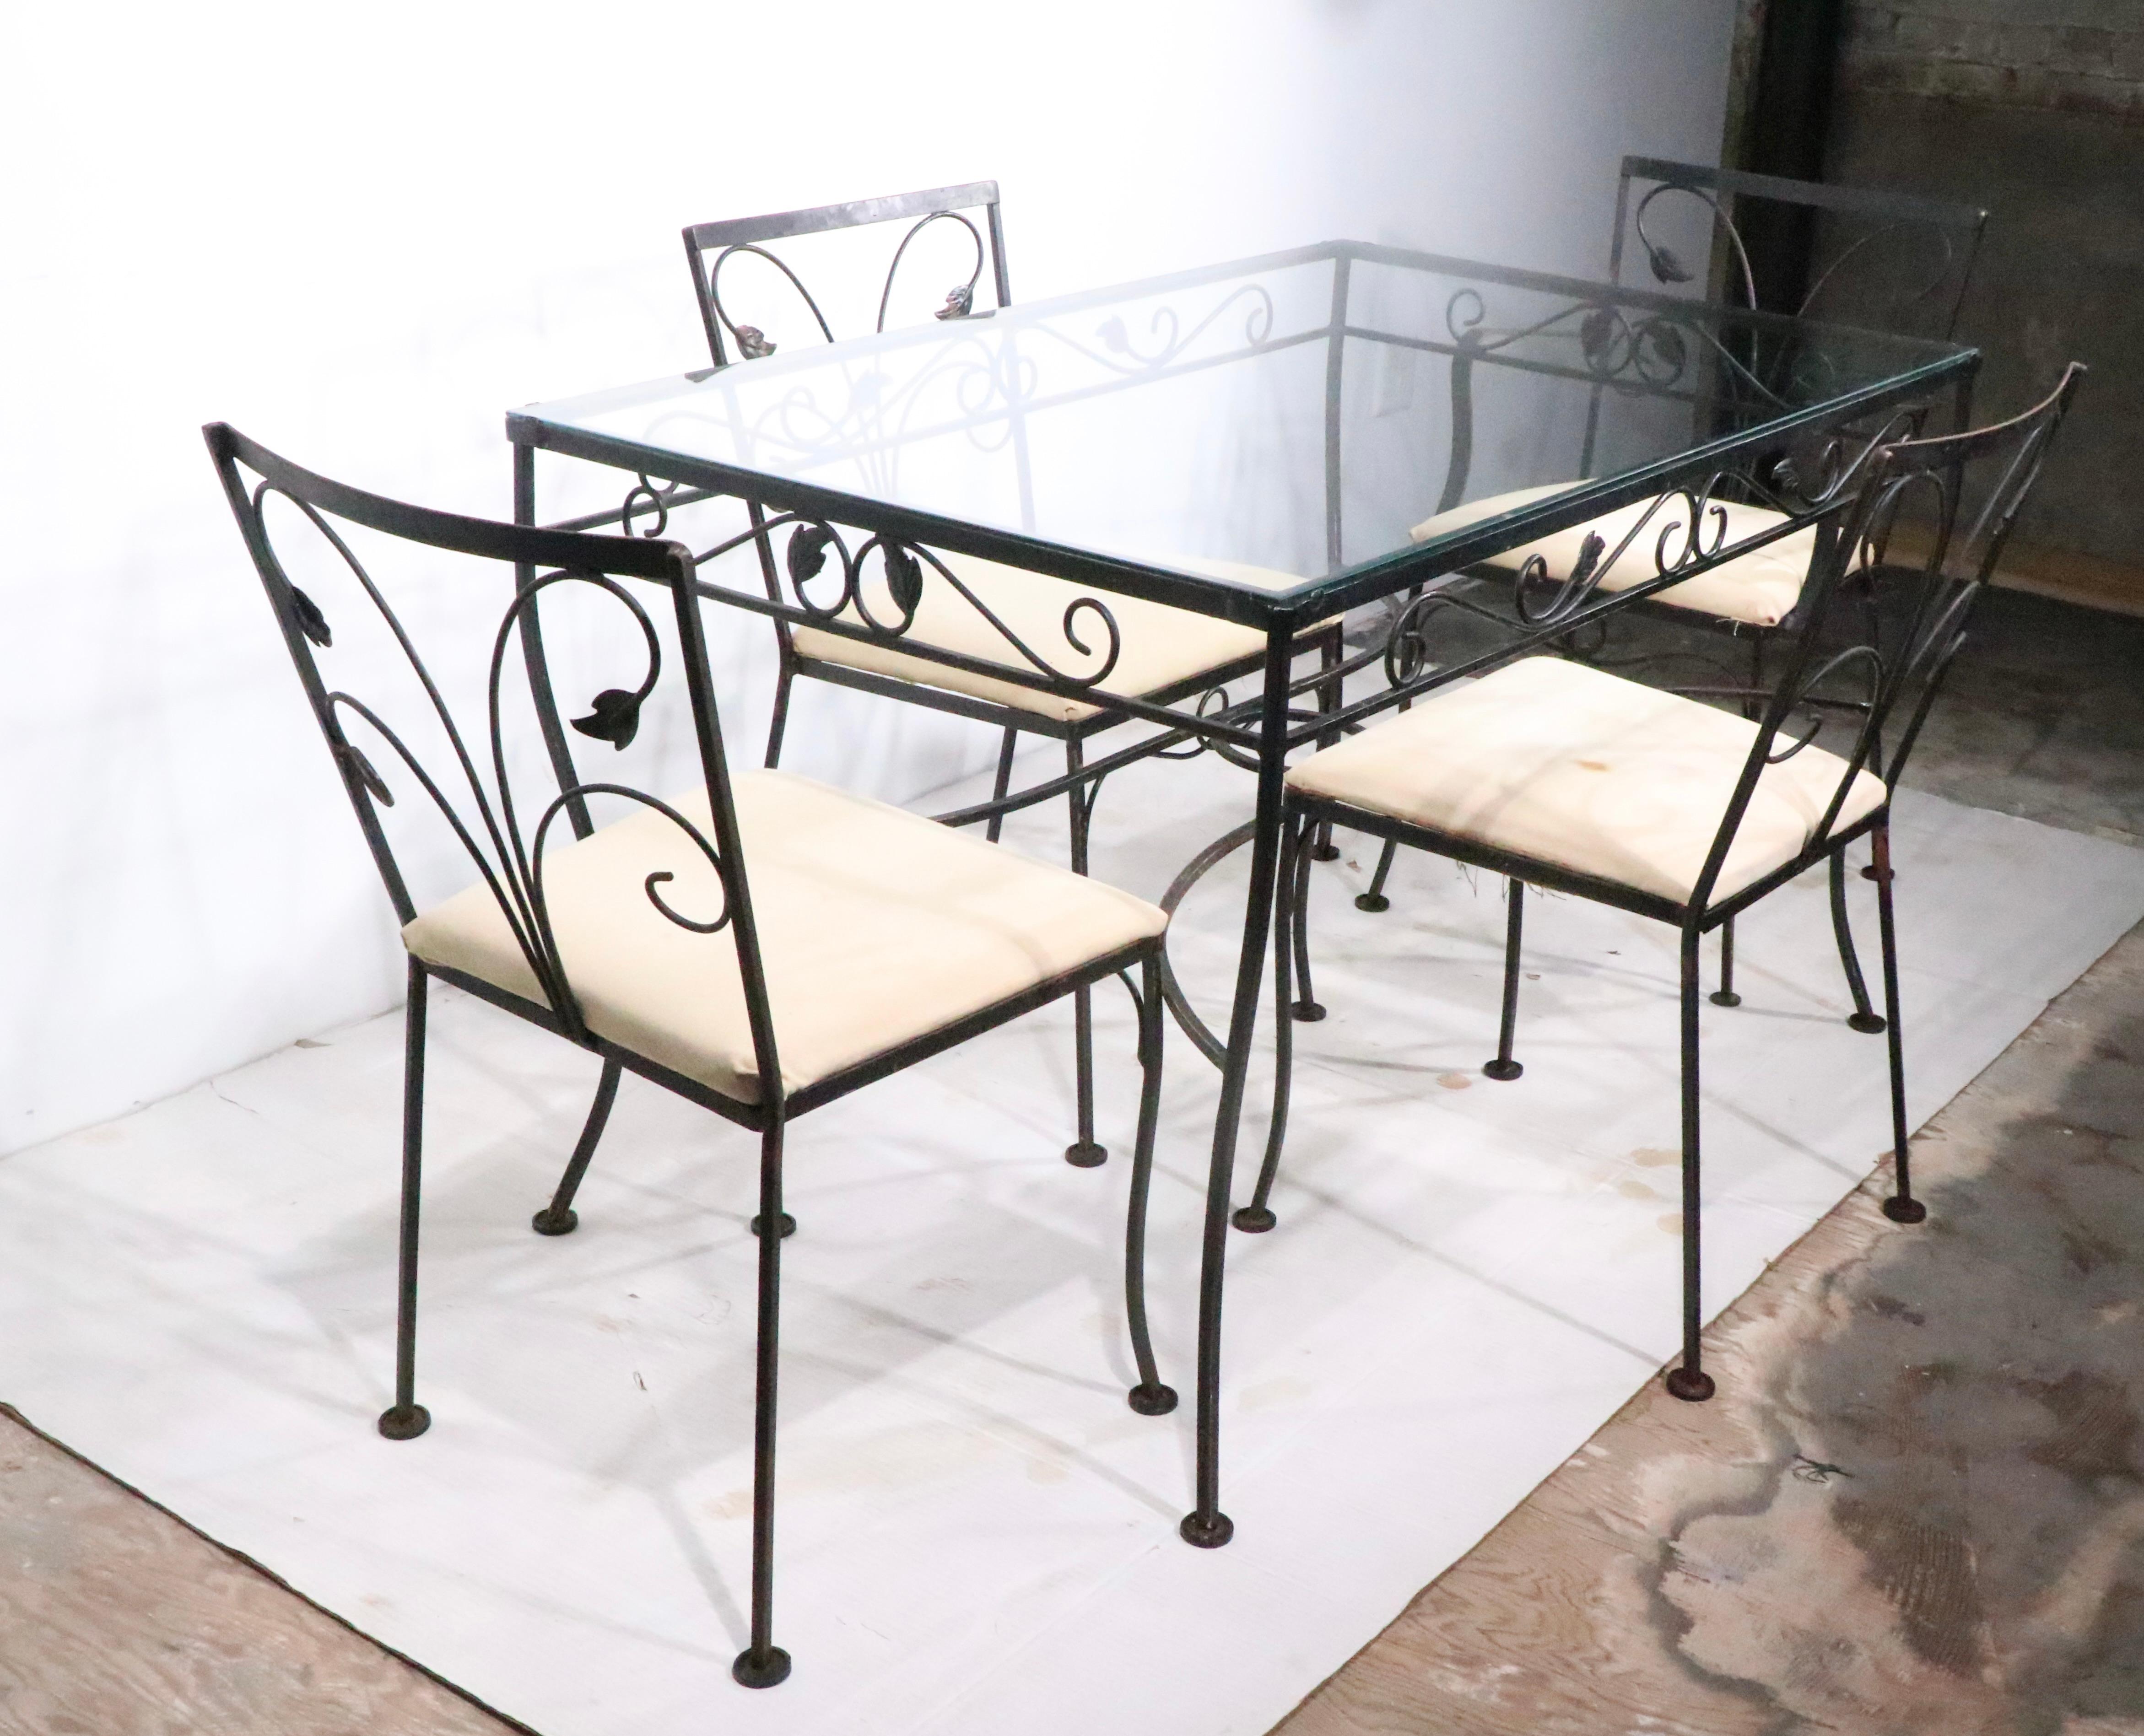 Voguish wrought iron  garden,  patio set including a glass top table, and  four chairs, one arm, three sides. Well crafted, and in very good, clean condition, seat cushions should be recovered.  Structurally sound and sturdy, finish shows some